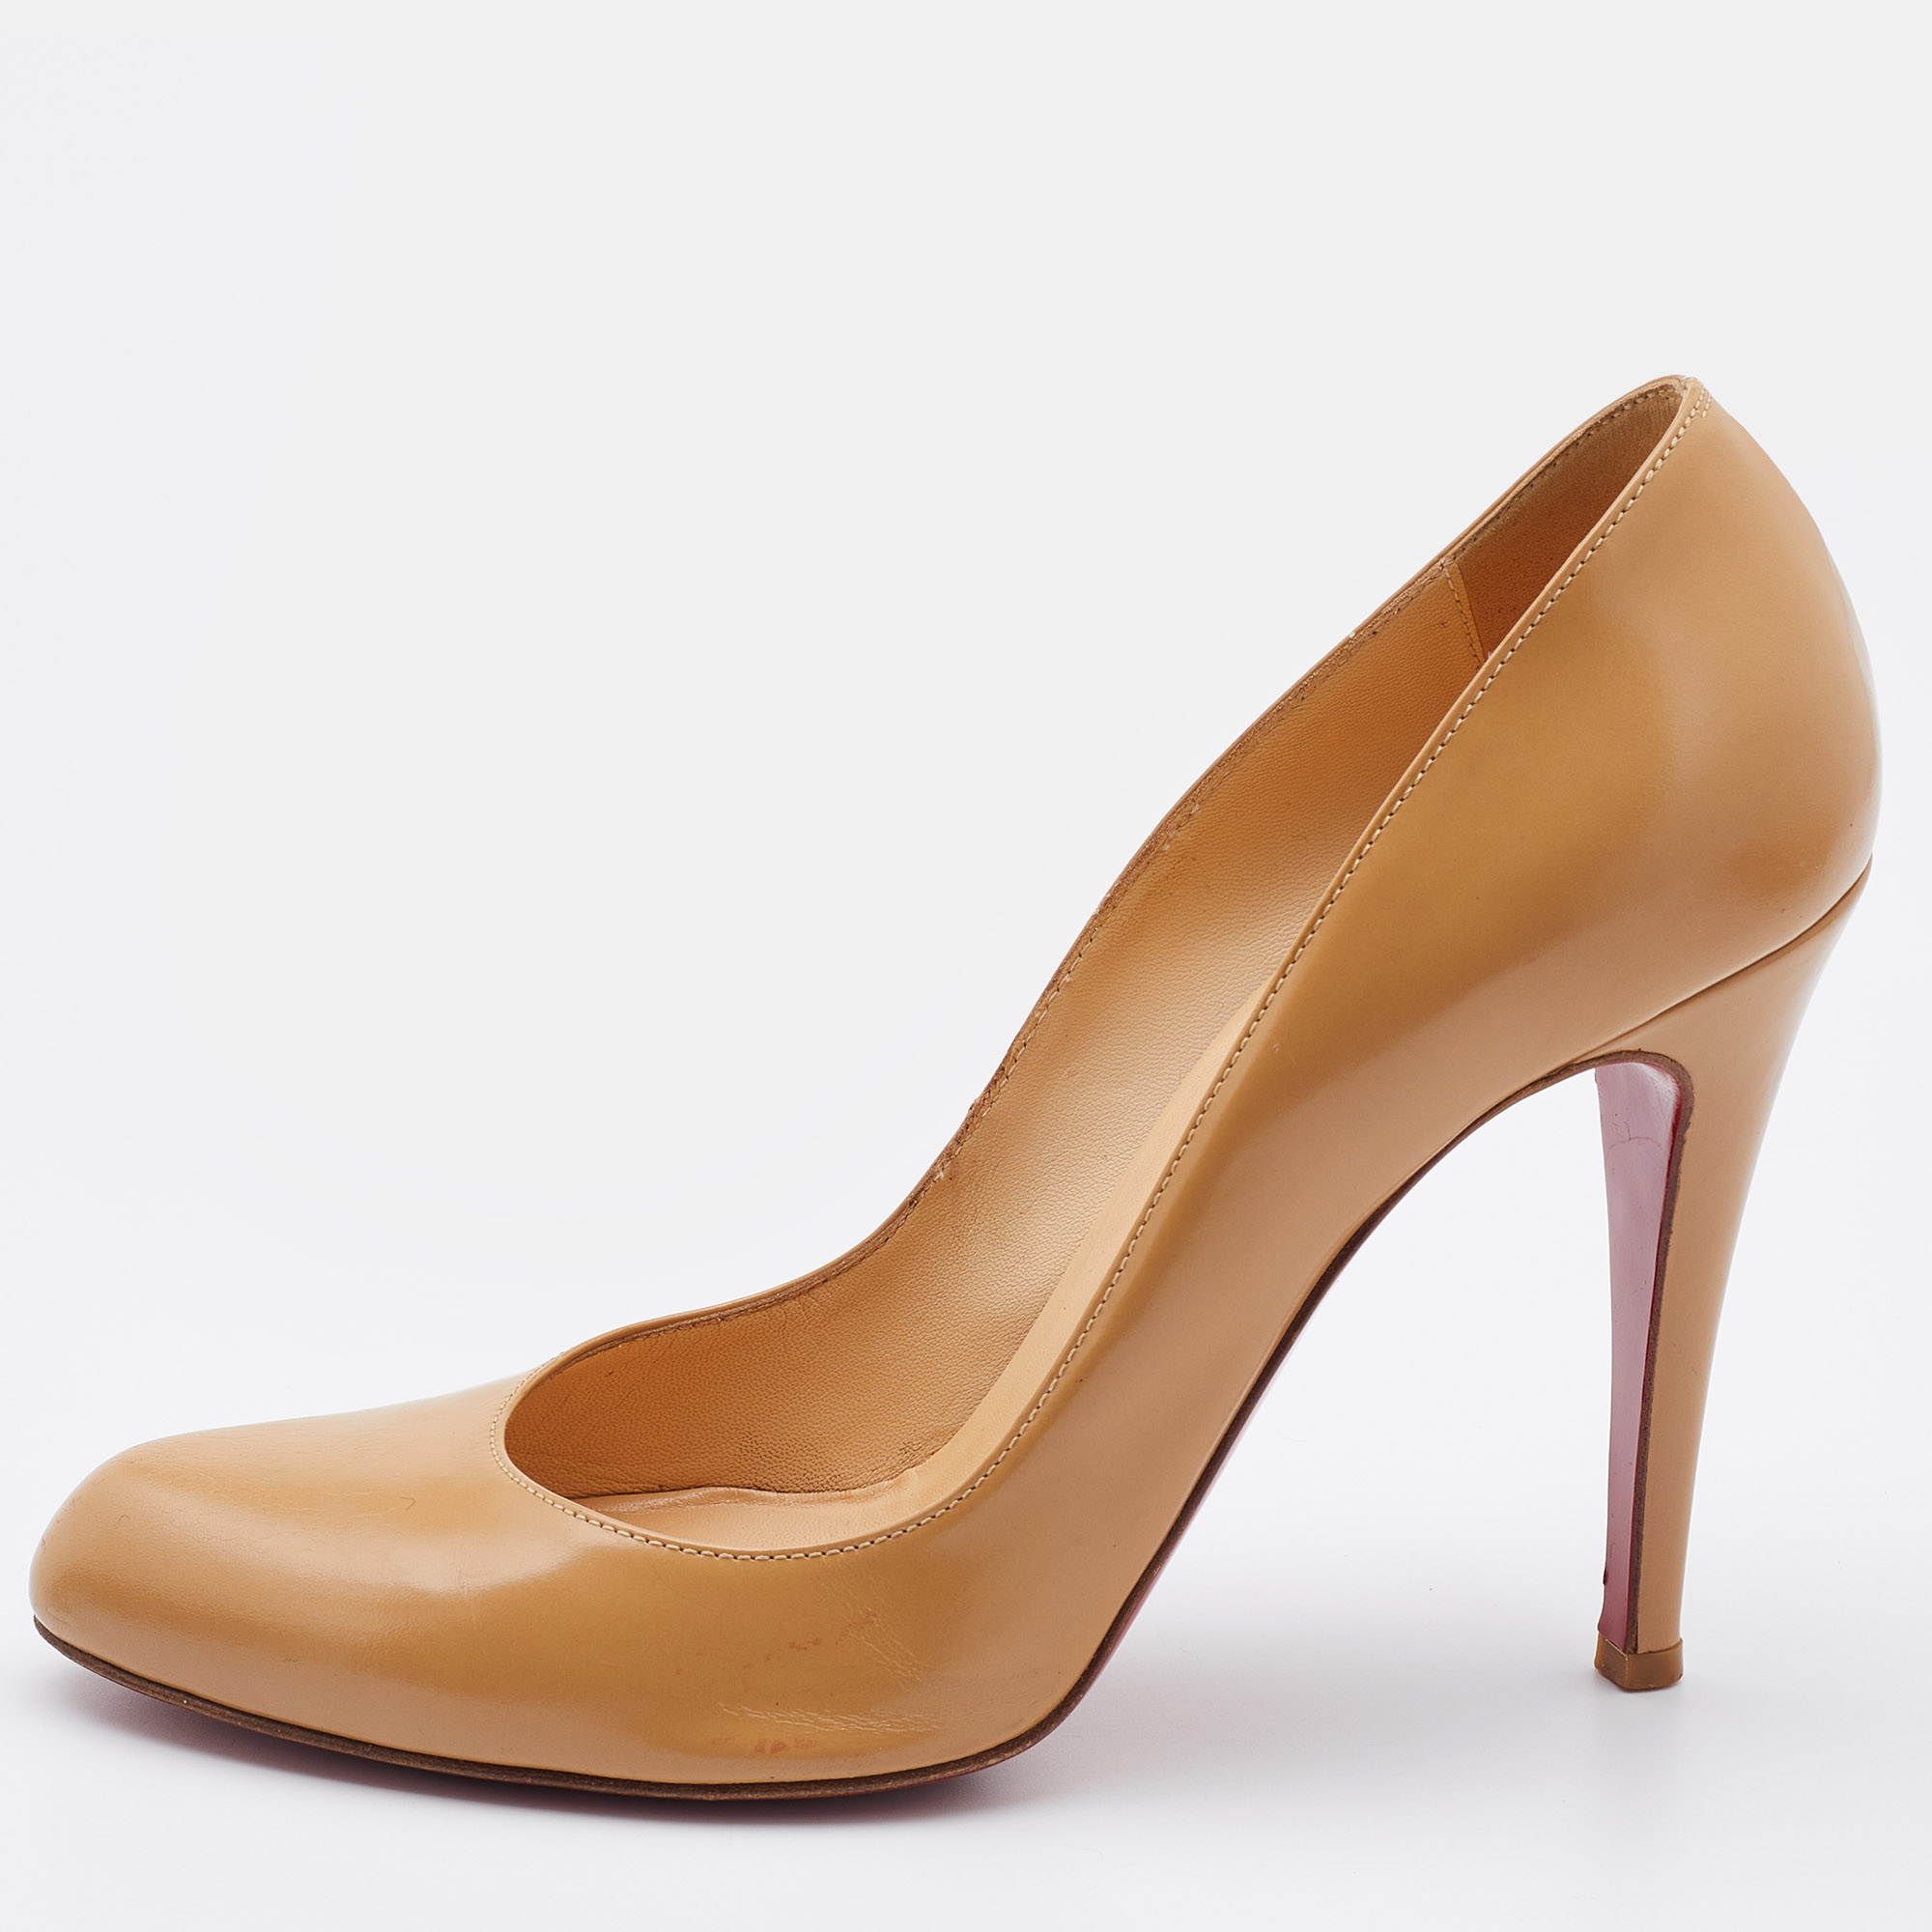 Christian Louboutin Beige Leather Simple Pumps Size 38.5